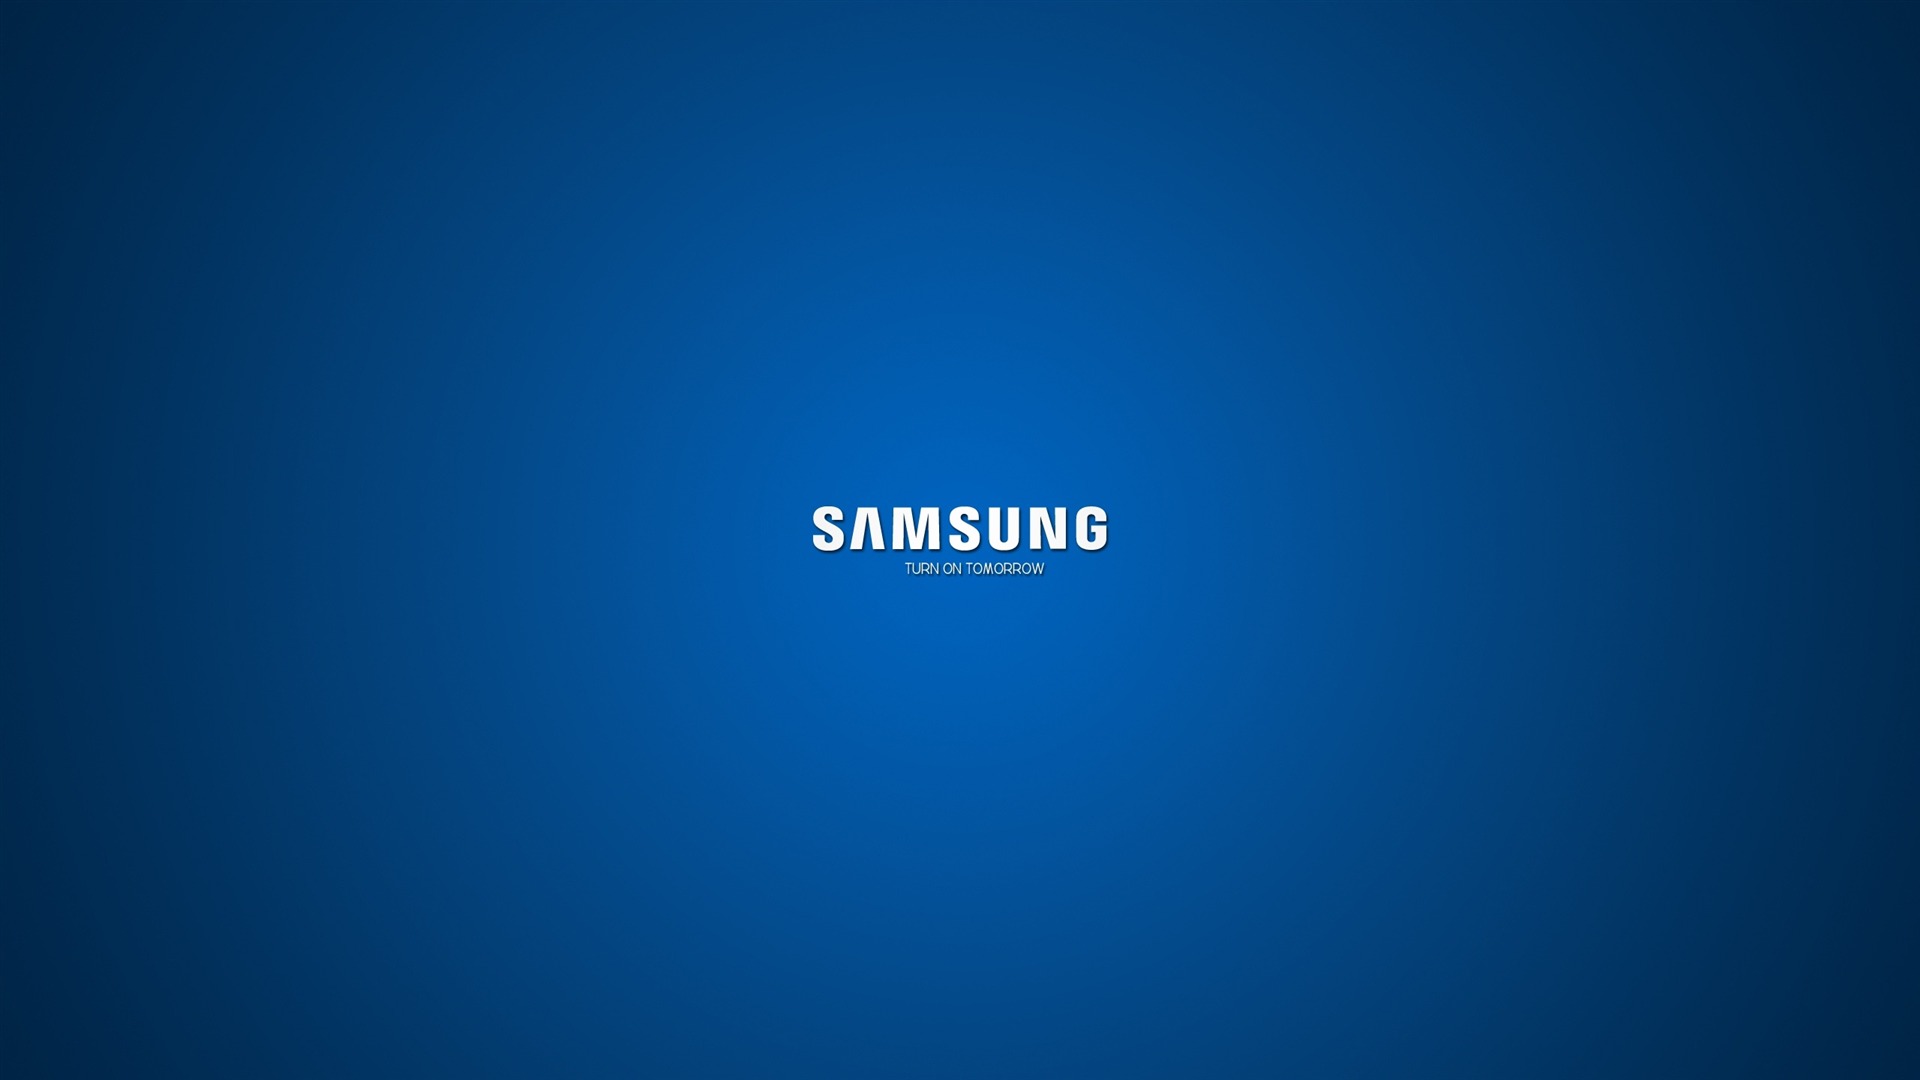 Cool Samsung Galaxy Note Smartphone Background Wallpaper